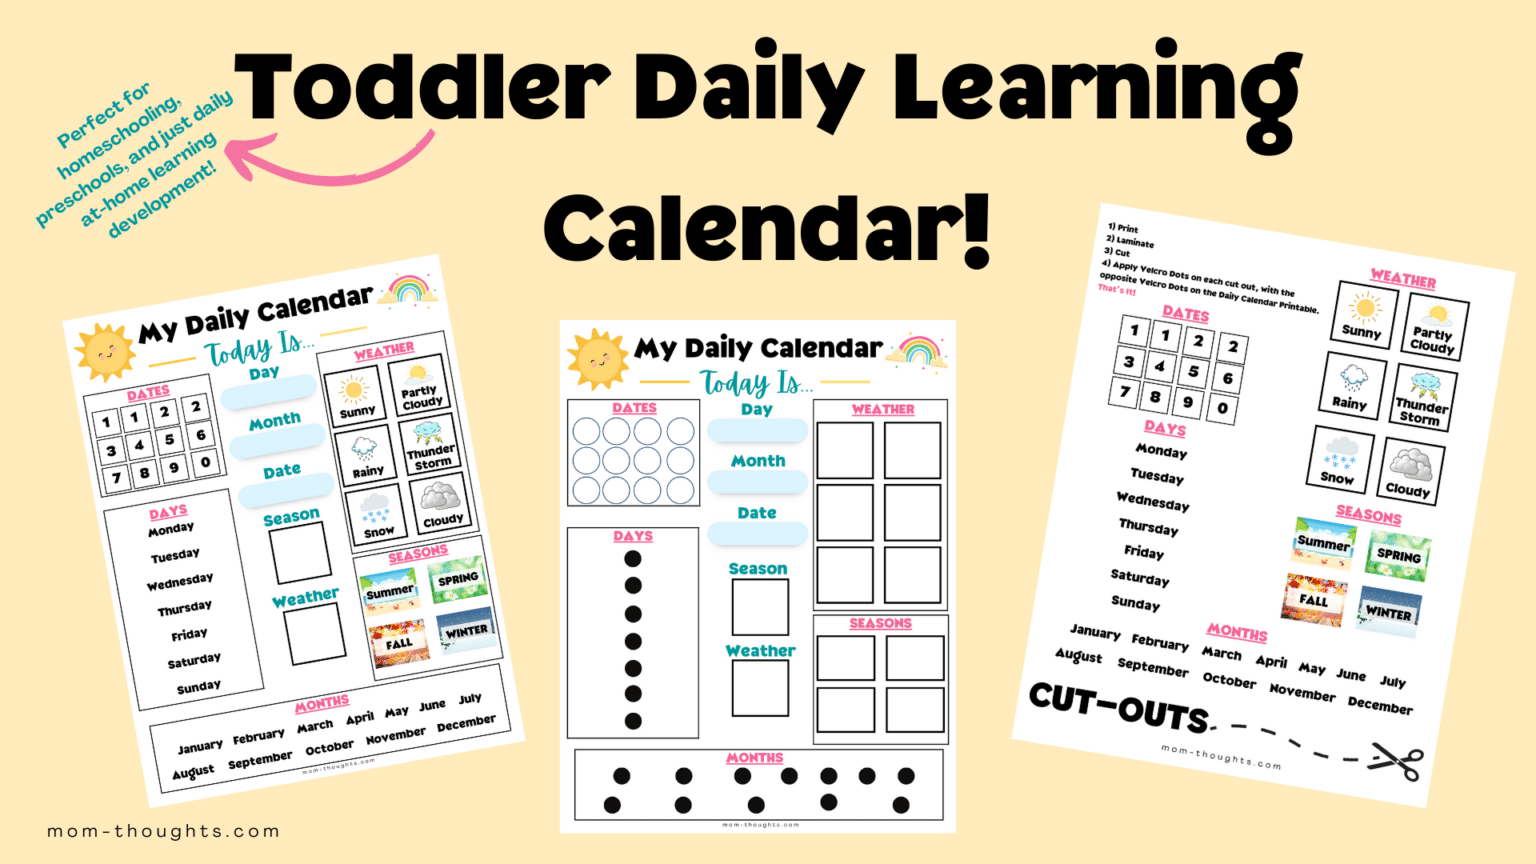 Daily Toddler CalendarInspired By Preschool Classrooms! MomThoughts